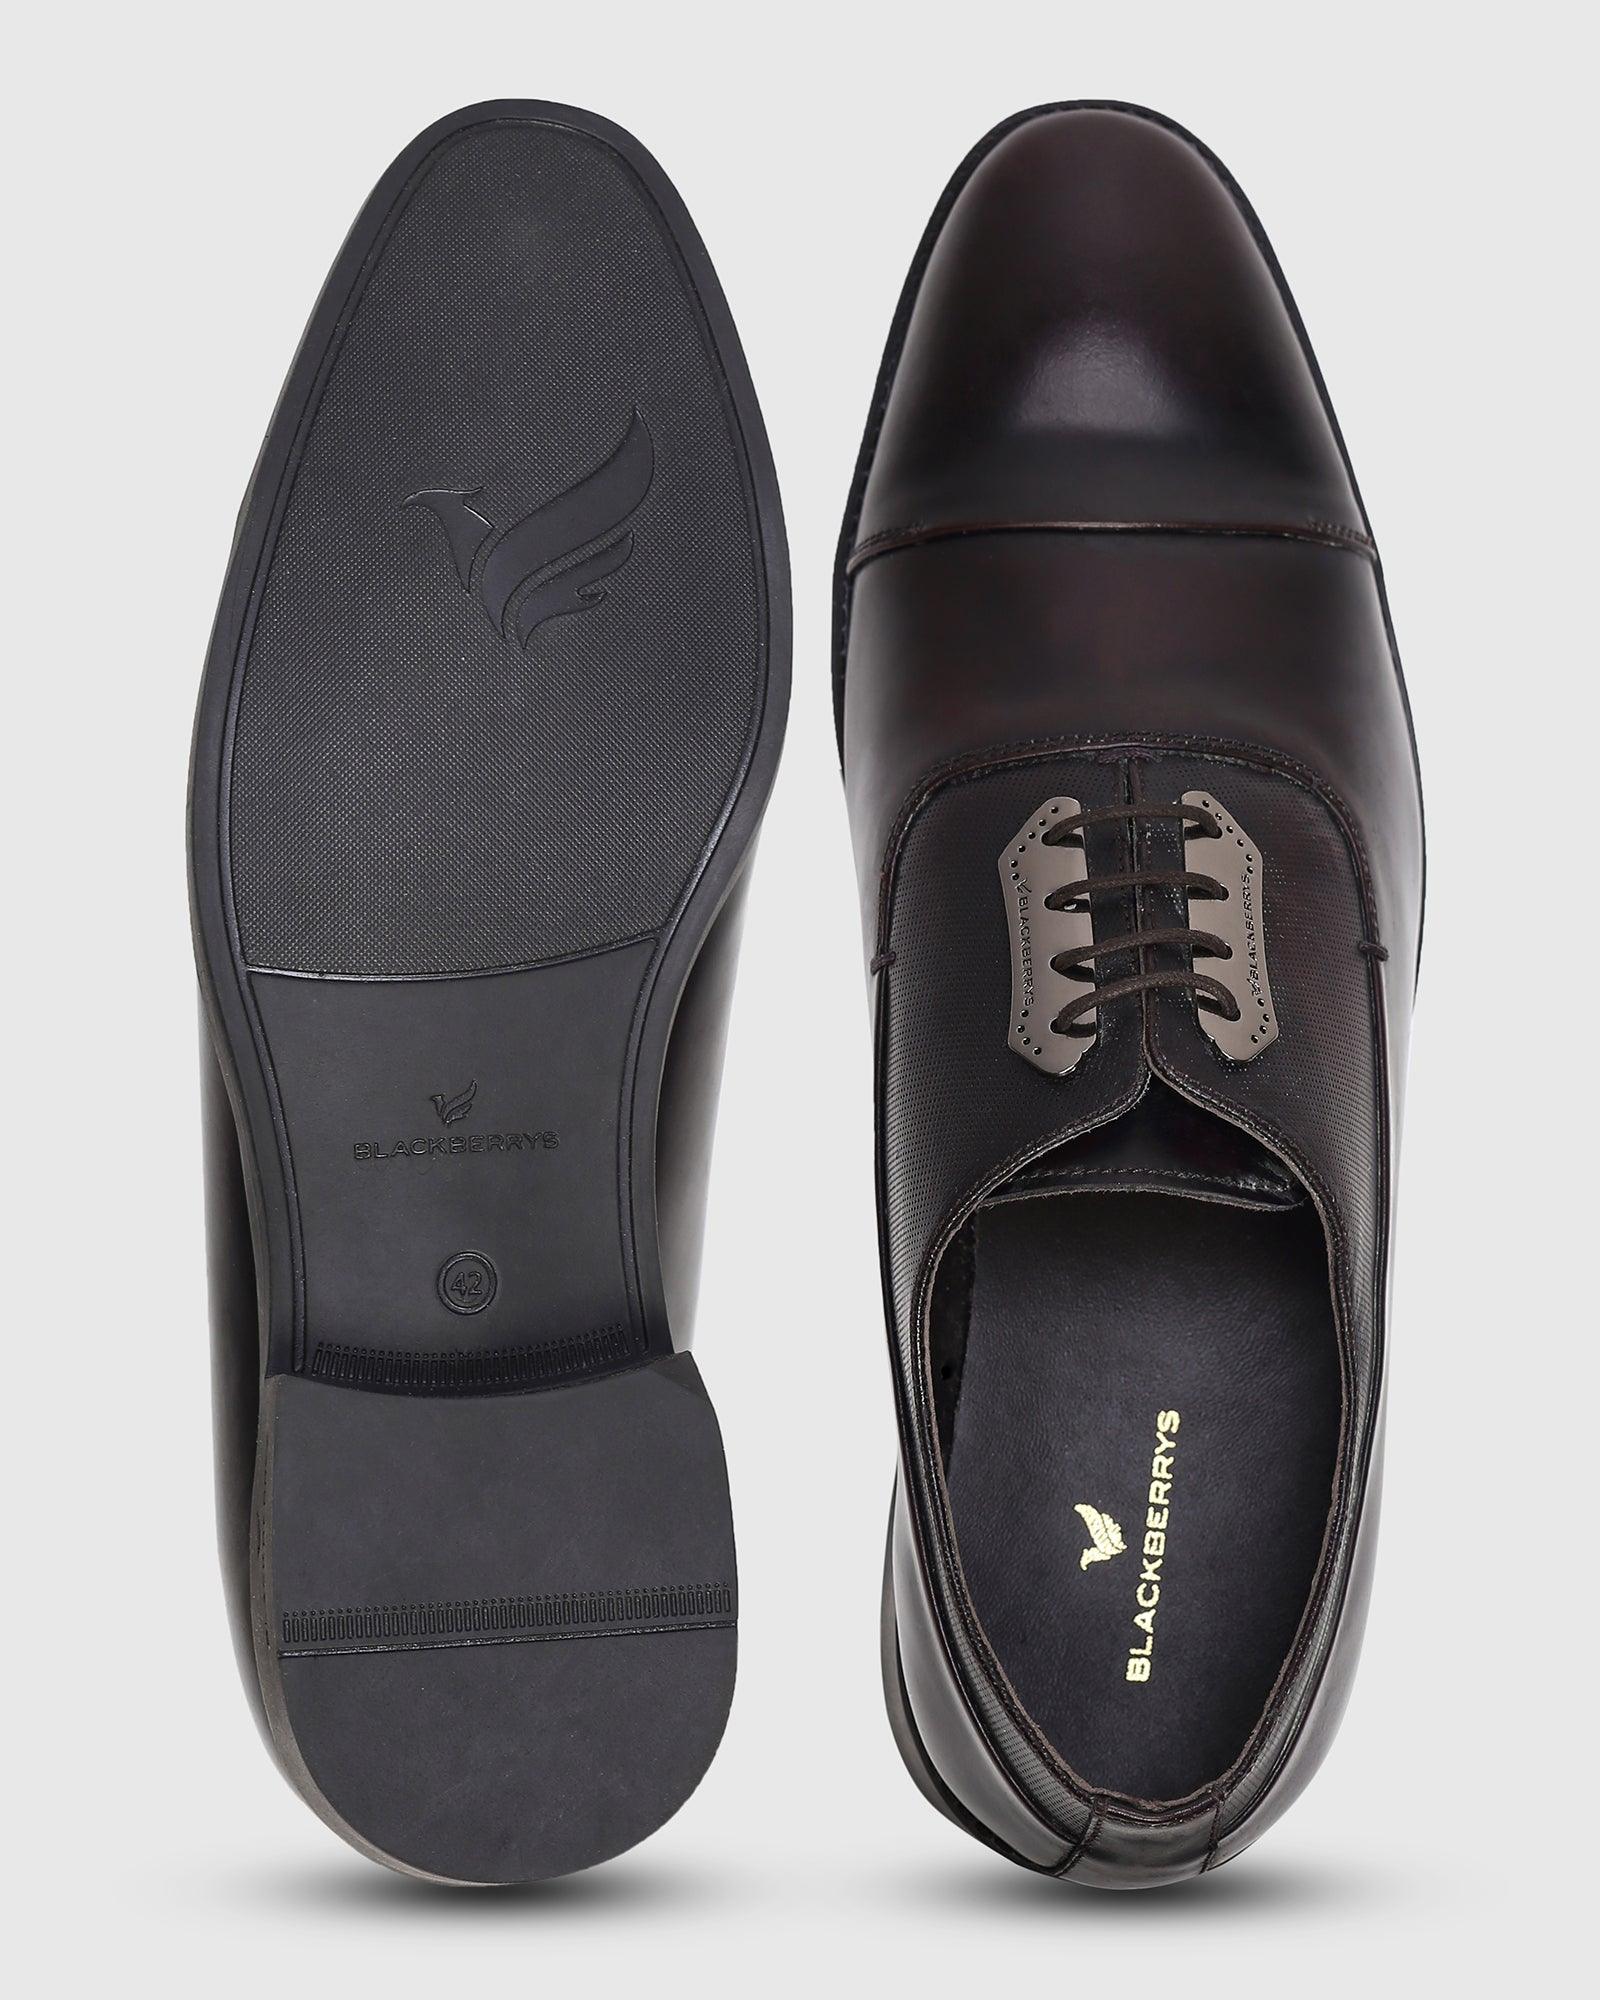 Leather Formal Burgandy Solid Oxford Shoes - Pronel